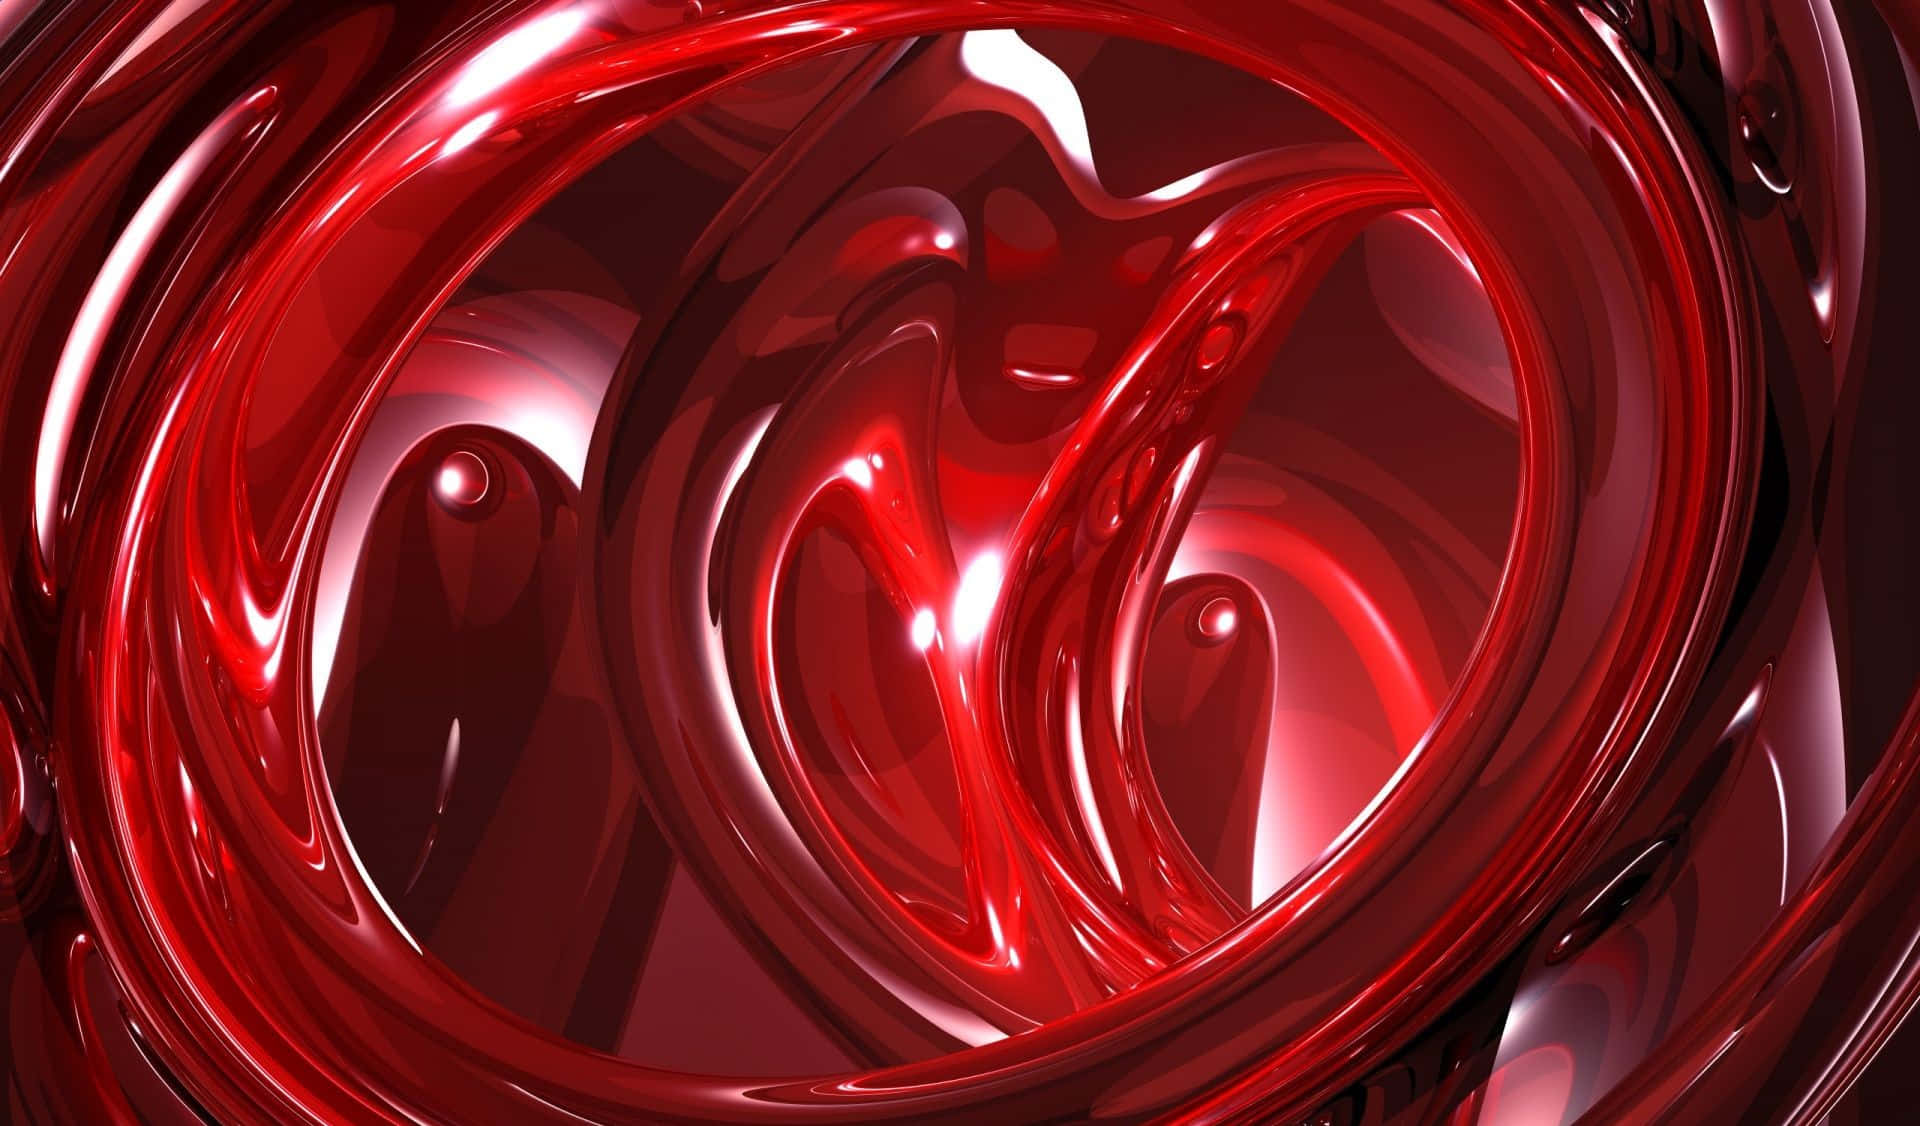 A Red Swirling Liquid With A Black Background